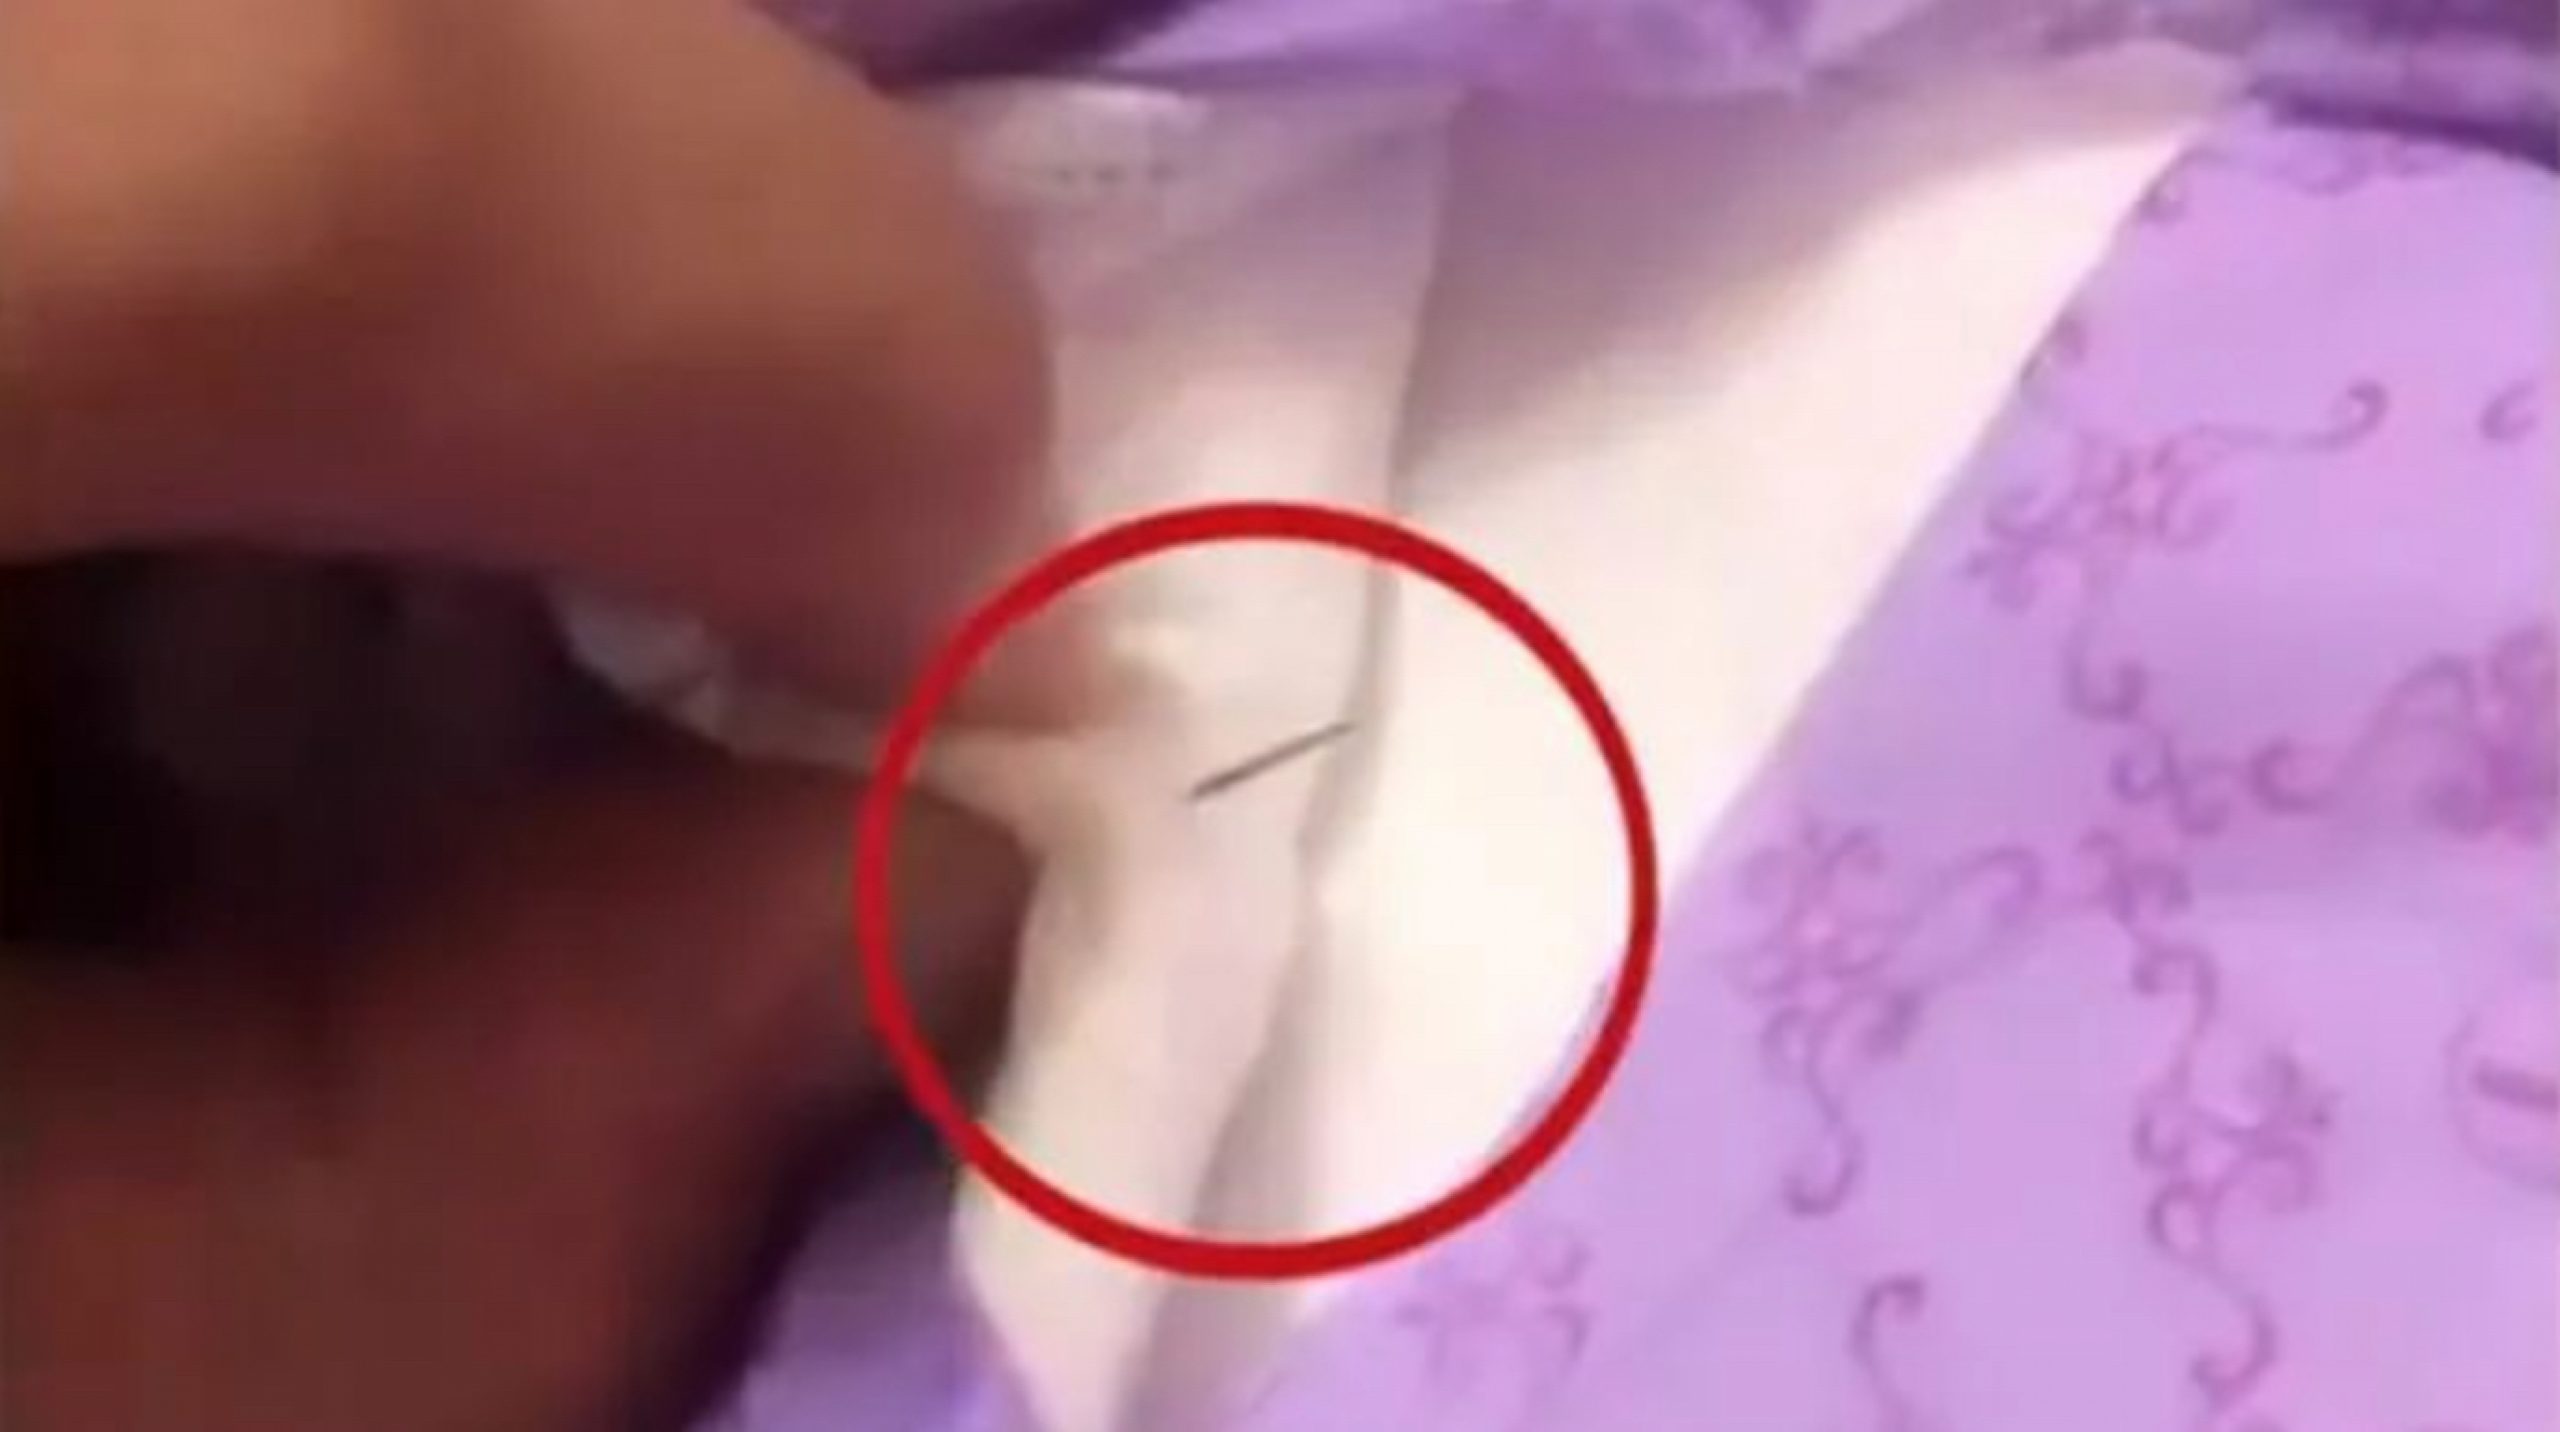 Needle found in sanitary pad allegedly produced by well-known Chinese feminine hygiene brand